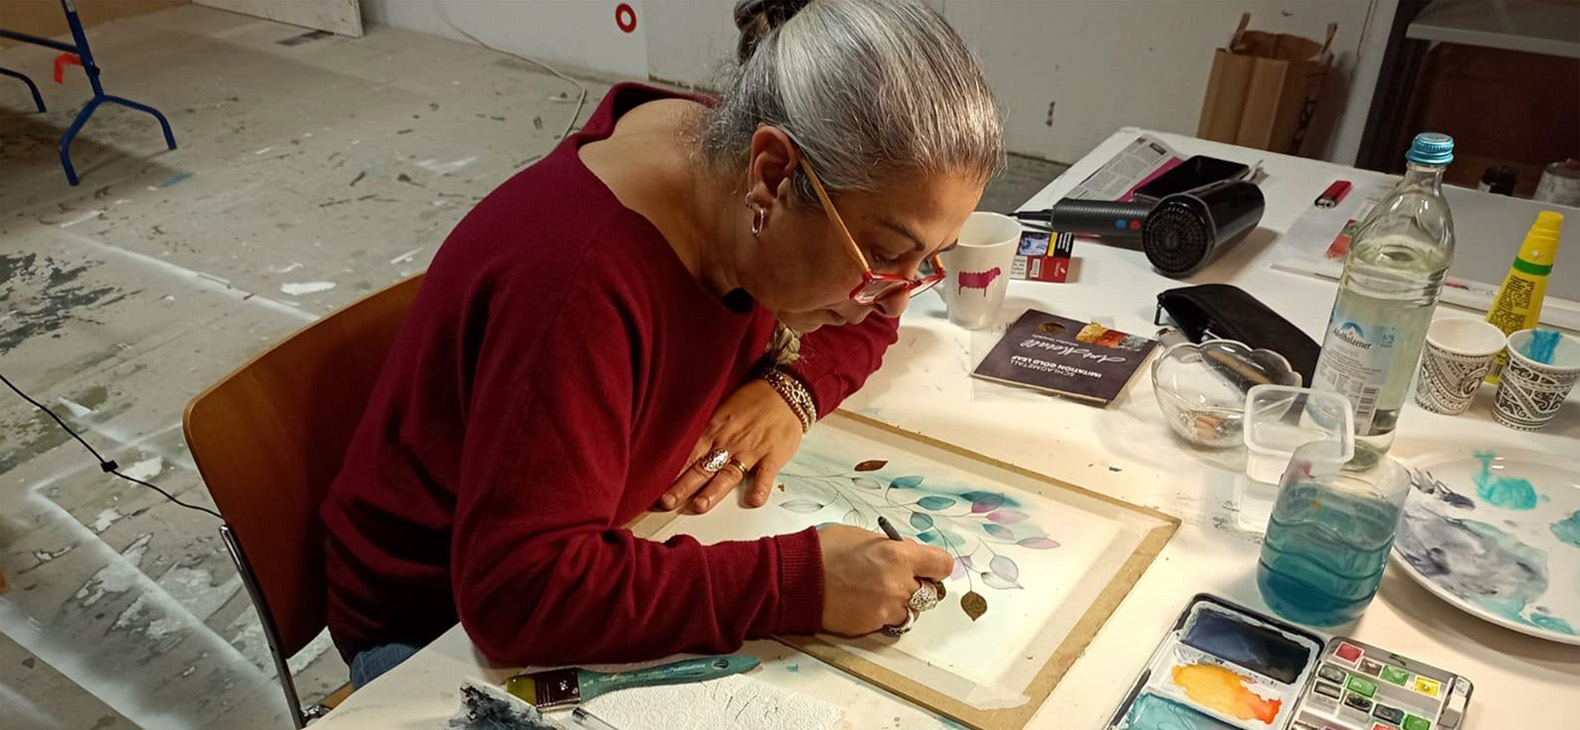 Schafhof Residency Program; Artists 2022: Carmen Toscano. Italian artist Carmen Toscano is seen working on a watercolor painting. She can be seen leaning over the painting from an angle.